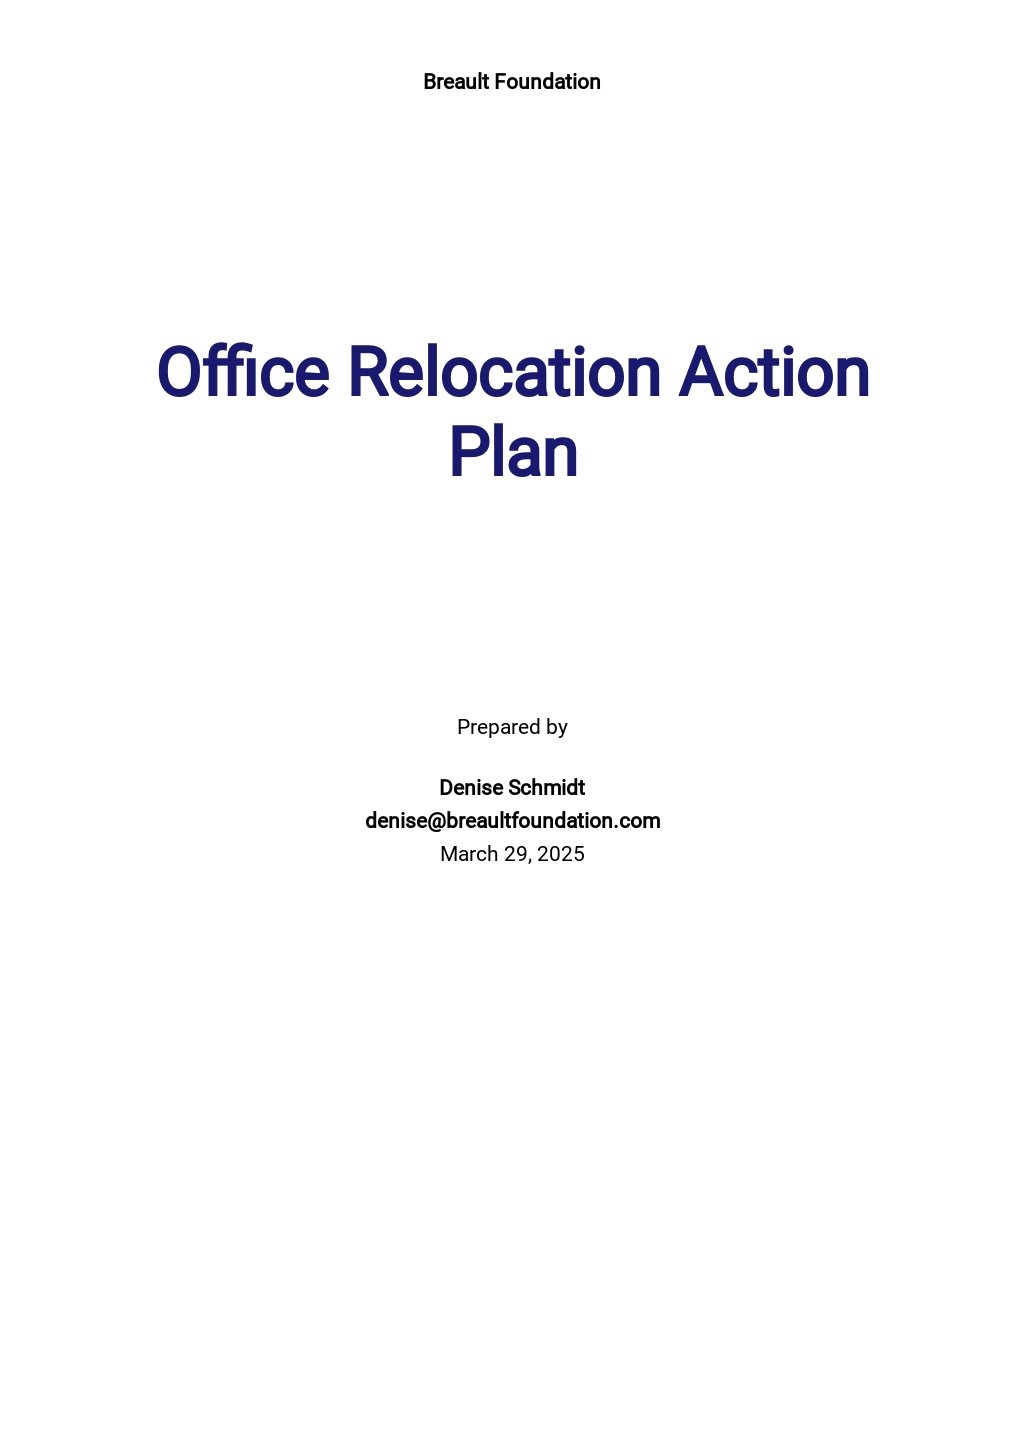 Office Relocation Action Plan Template [Free PDF] Word (DOC) Apple